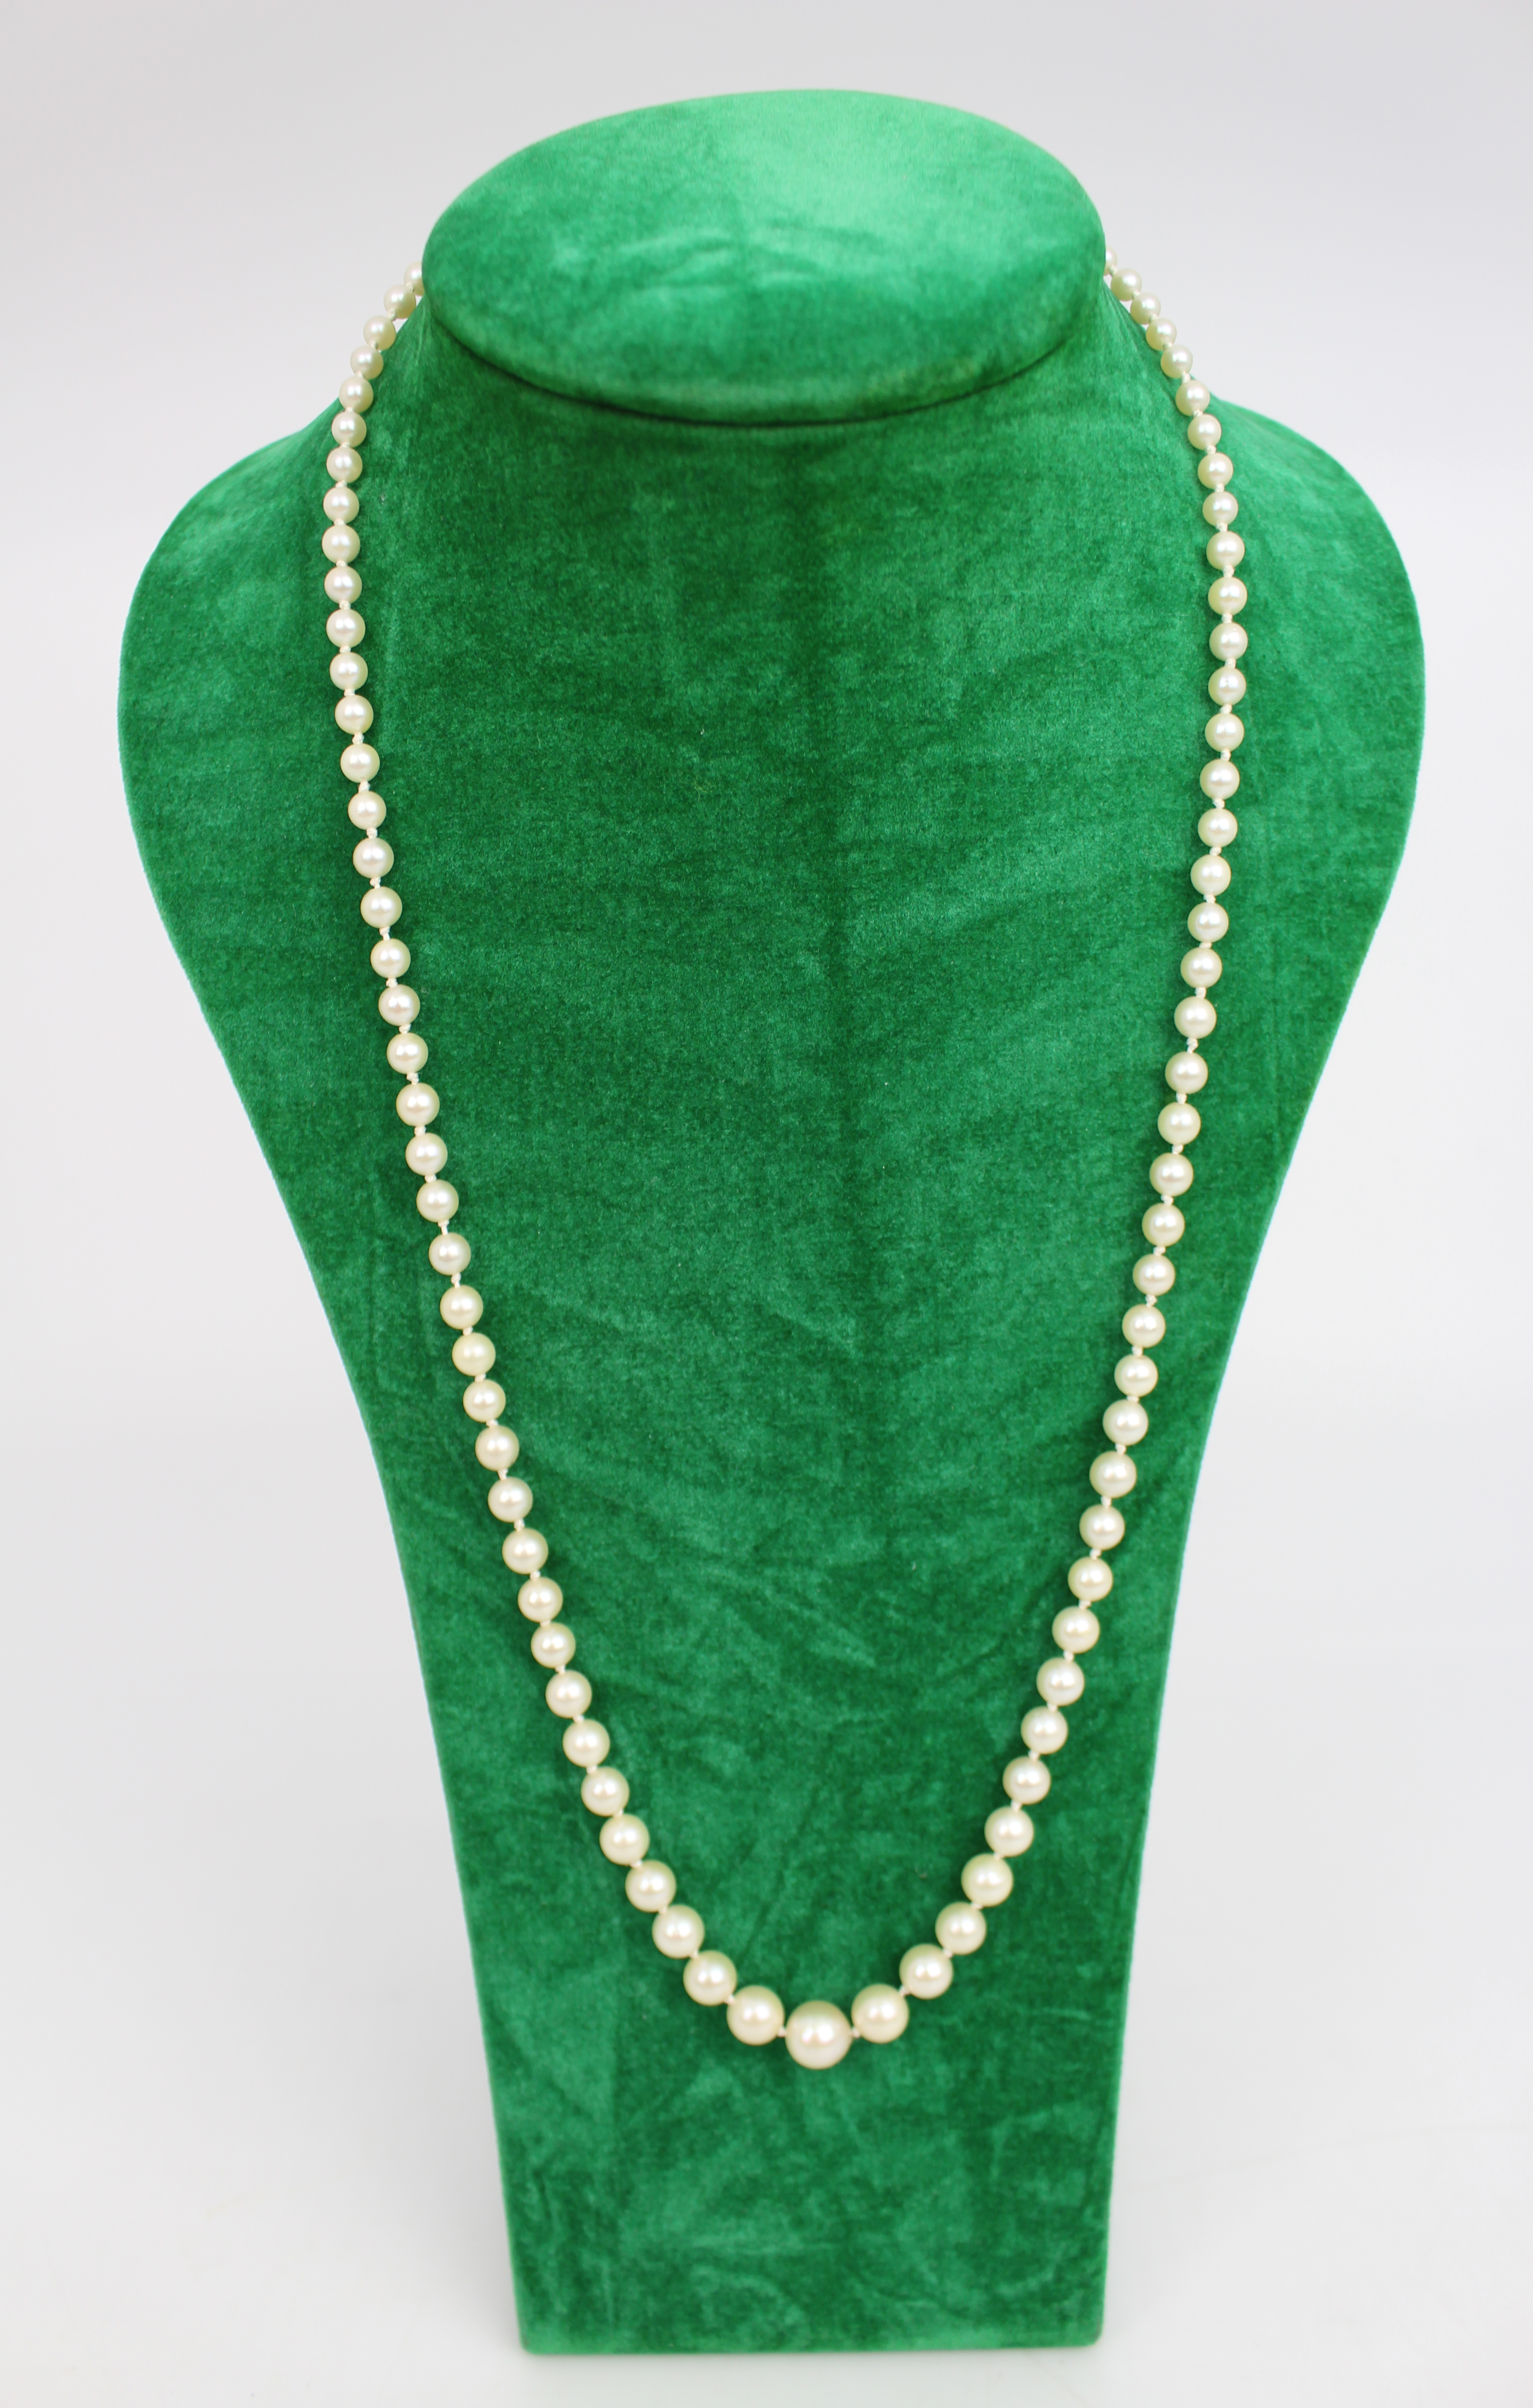 Graduated Pearl Necklace with Gold Clasp - Image 7 of 7